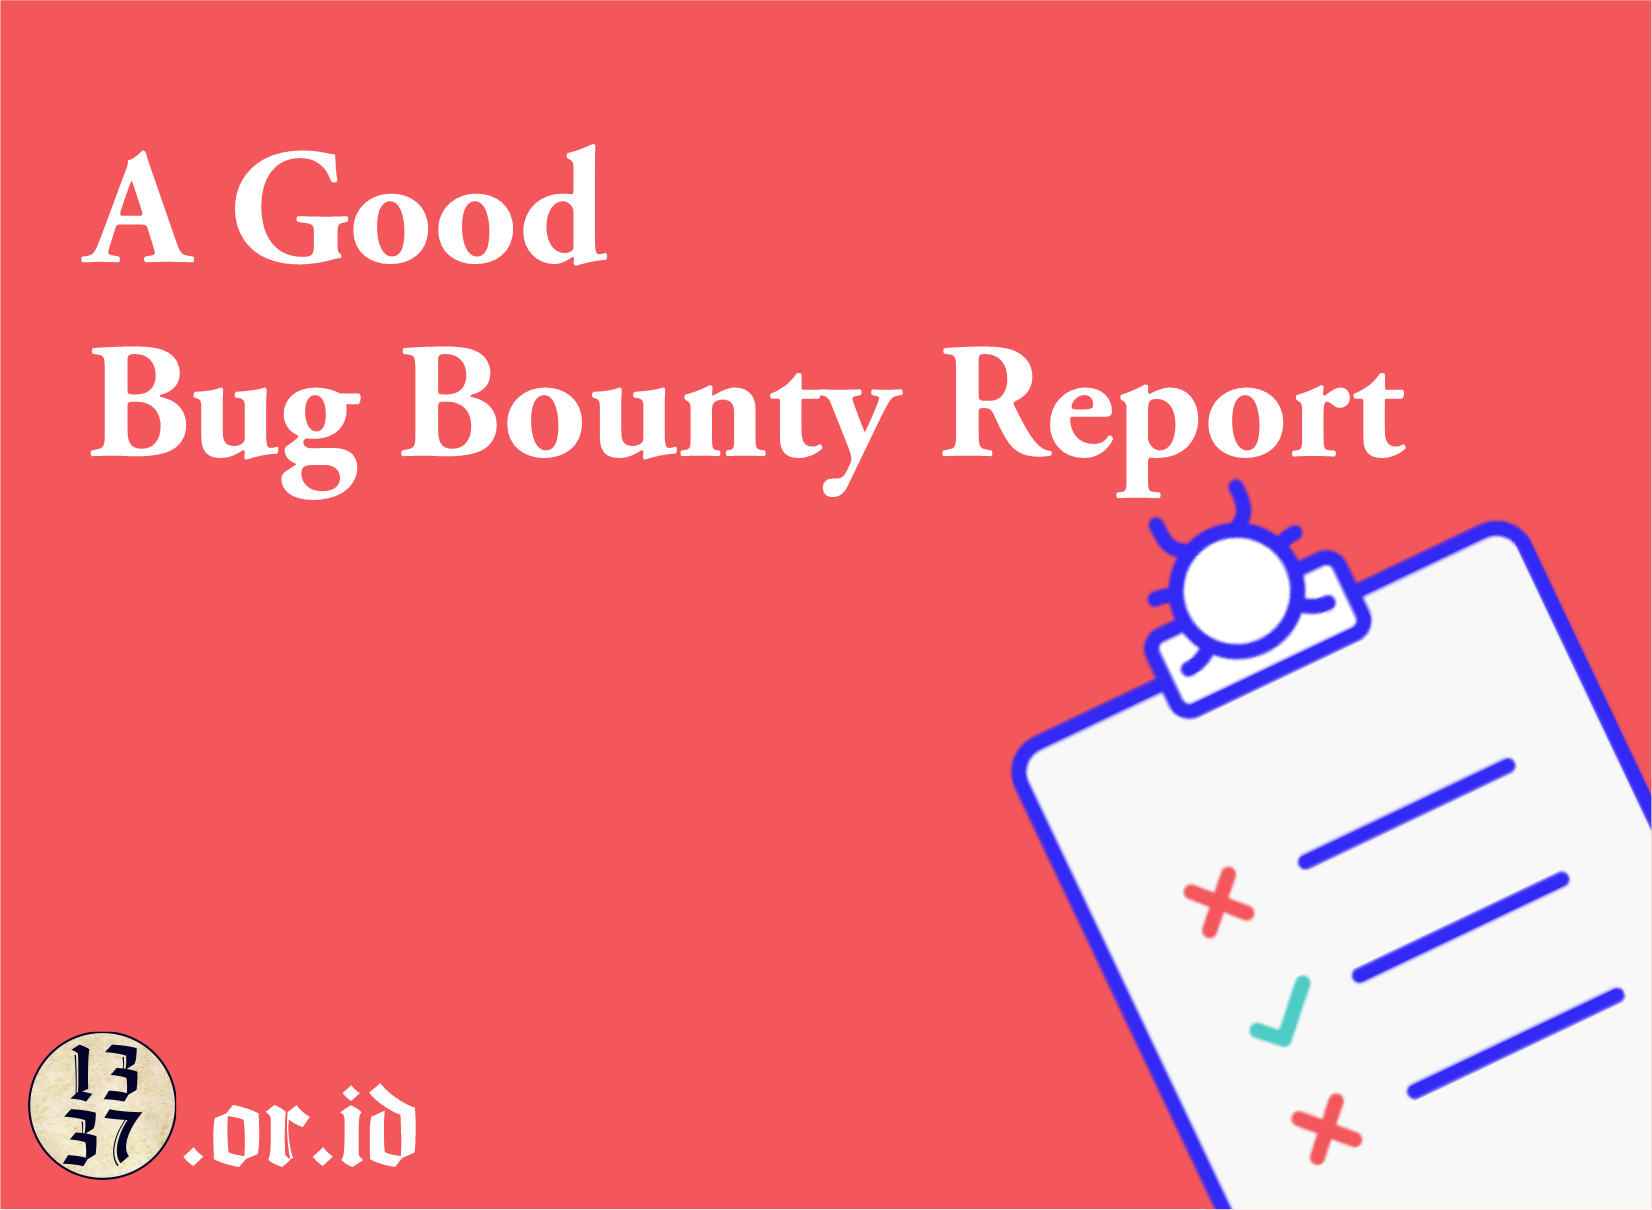 How to Make a Good Bug Bounty Report